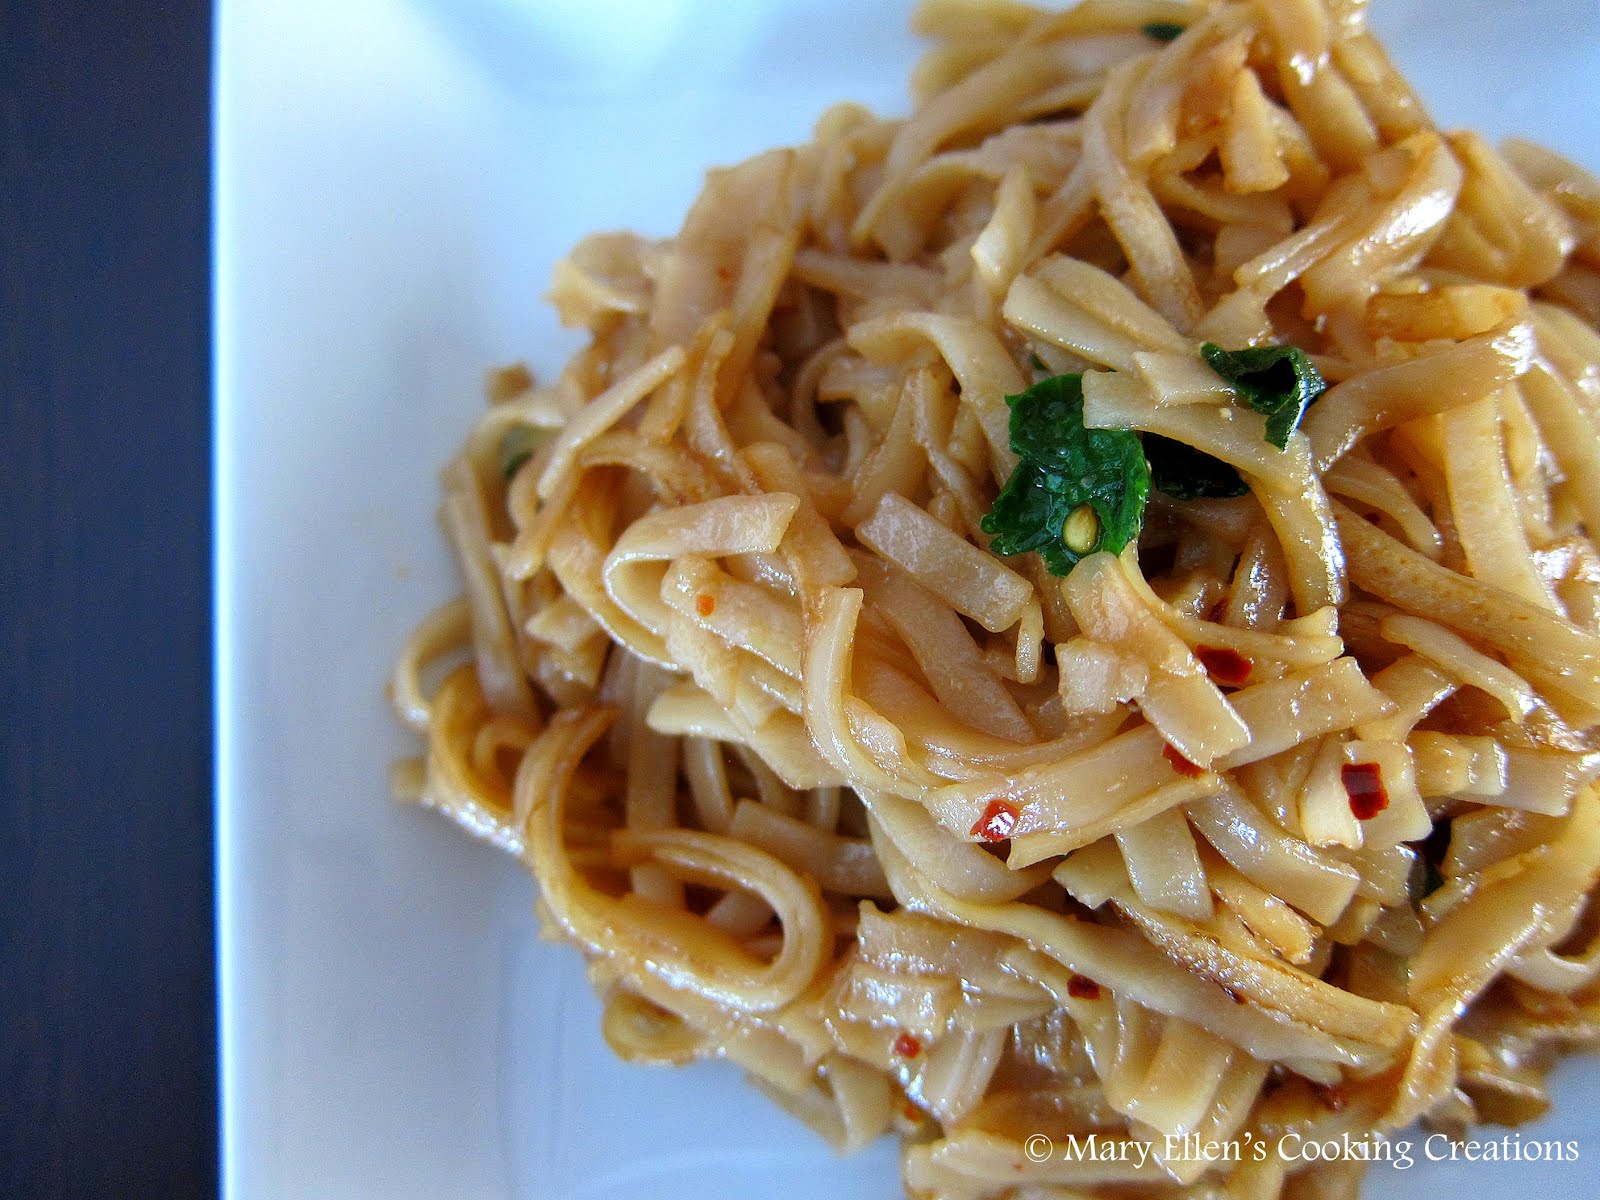 Mary Ellen's Cooking Creations: Spicy Sesame-Soy Rice Noodles